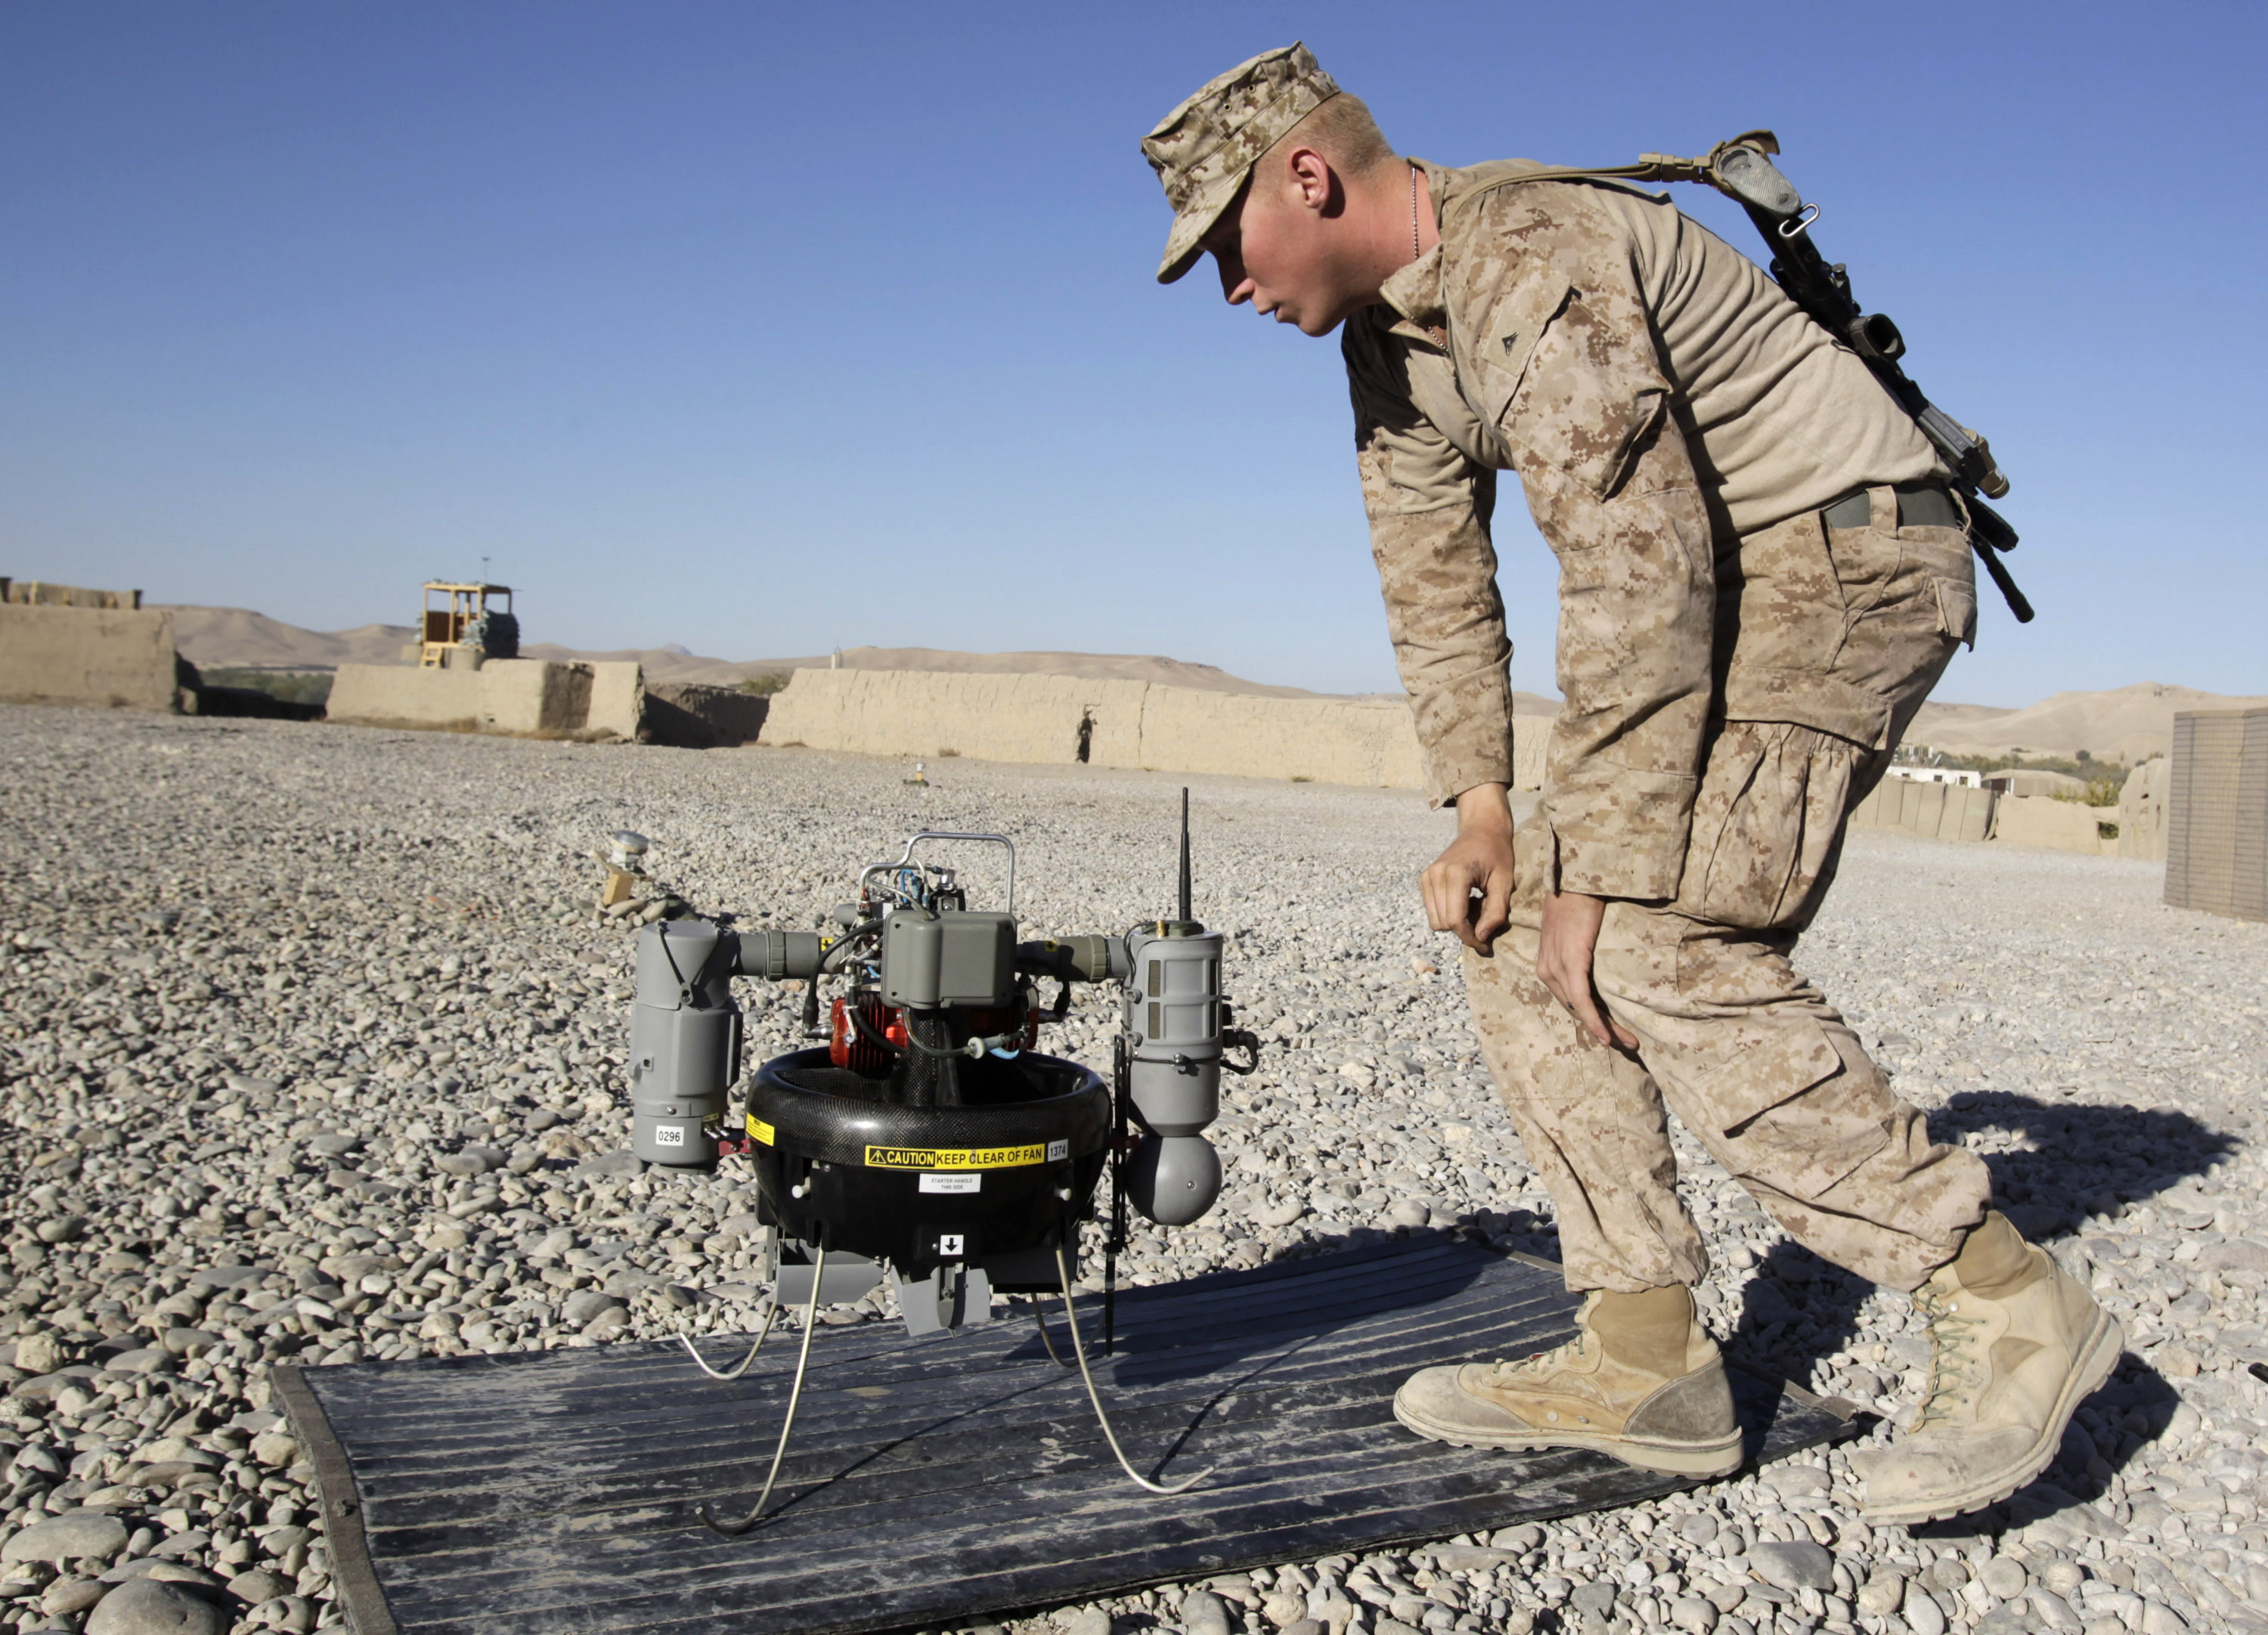 Why Drones Work: The Case for Washington's Weapon of Choice